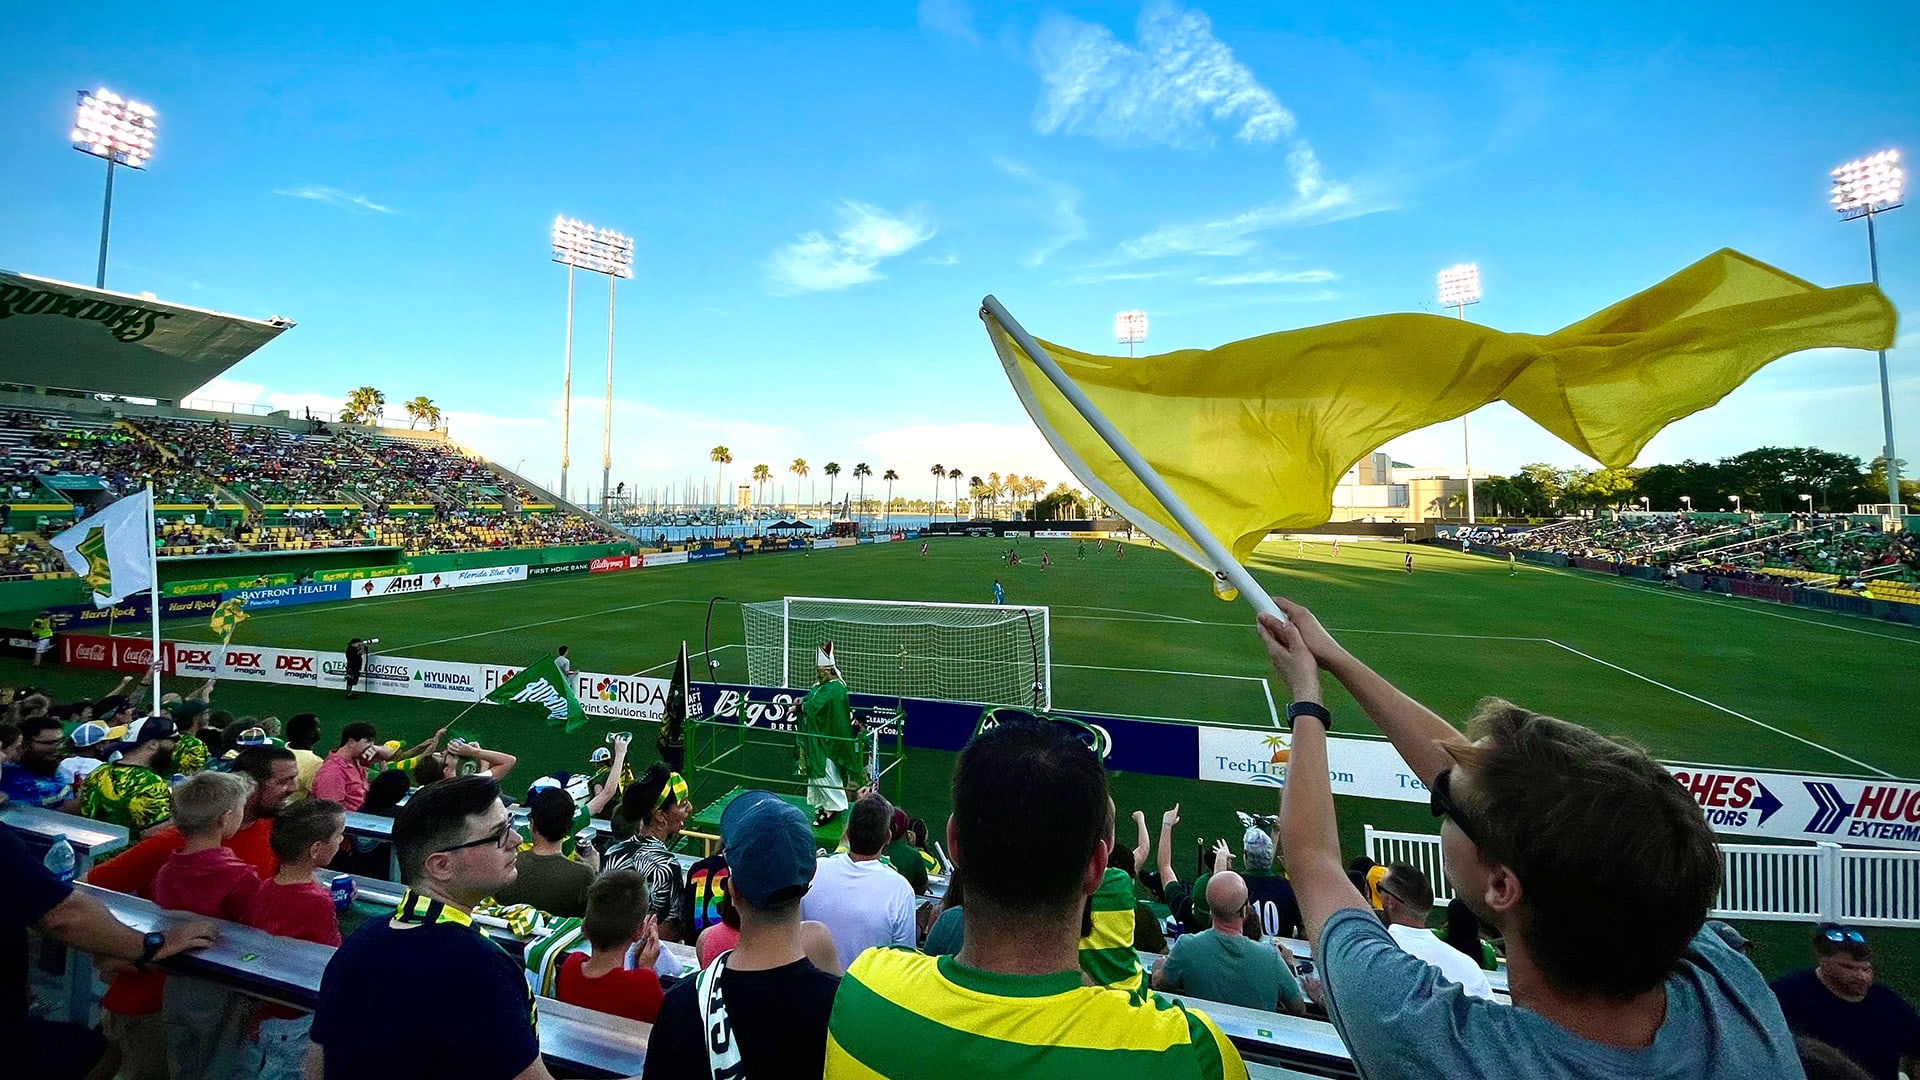 Tampa Bay Rowdies Schedule Two Home Games - Destination Tampa Bay™